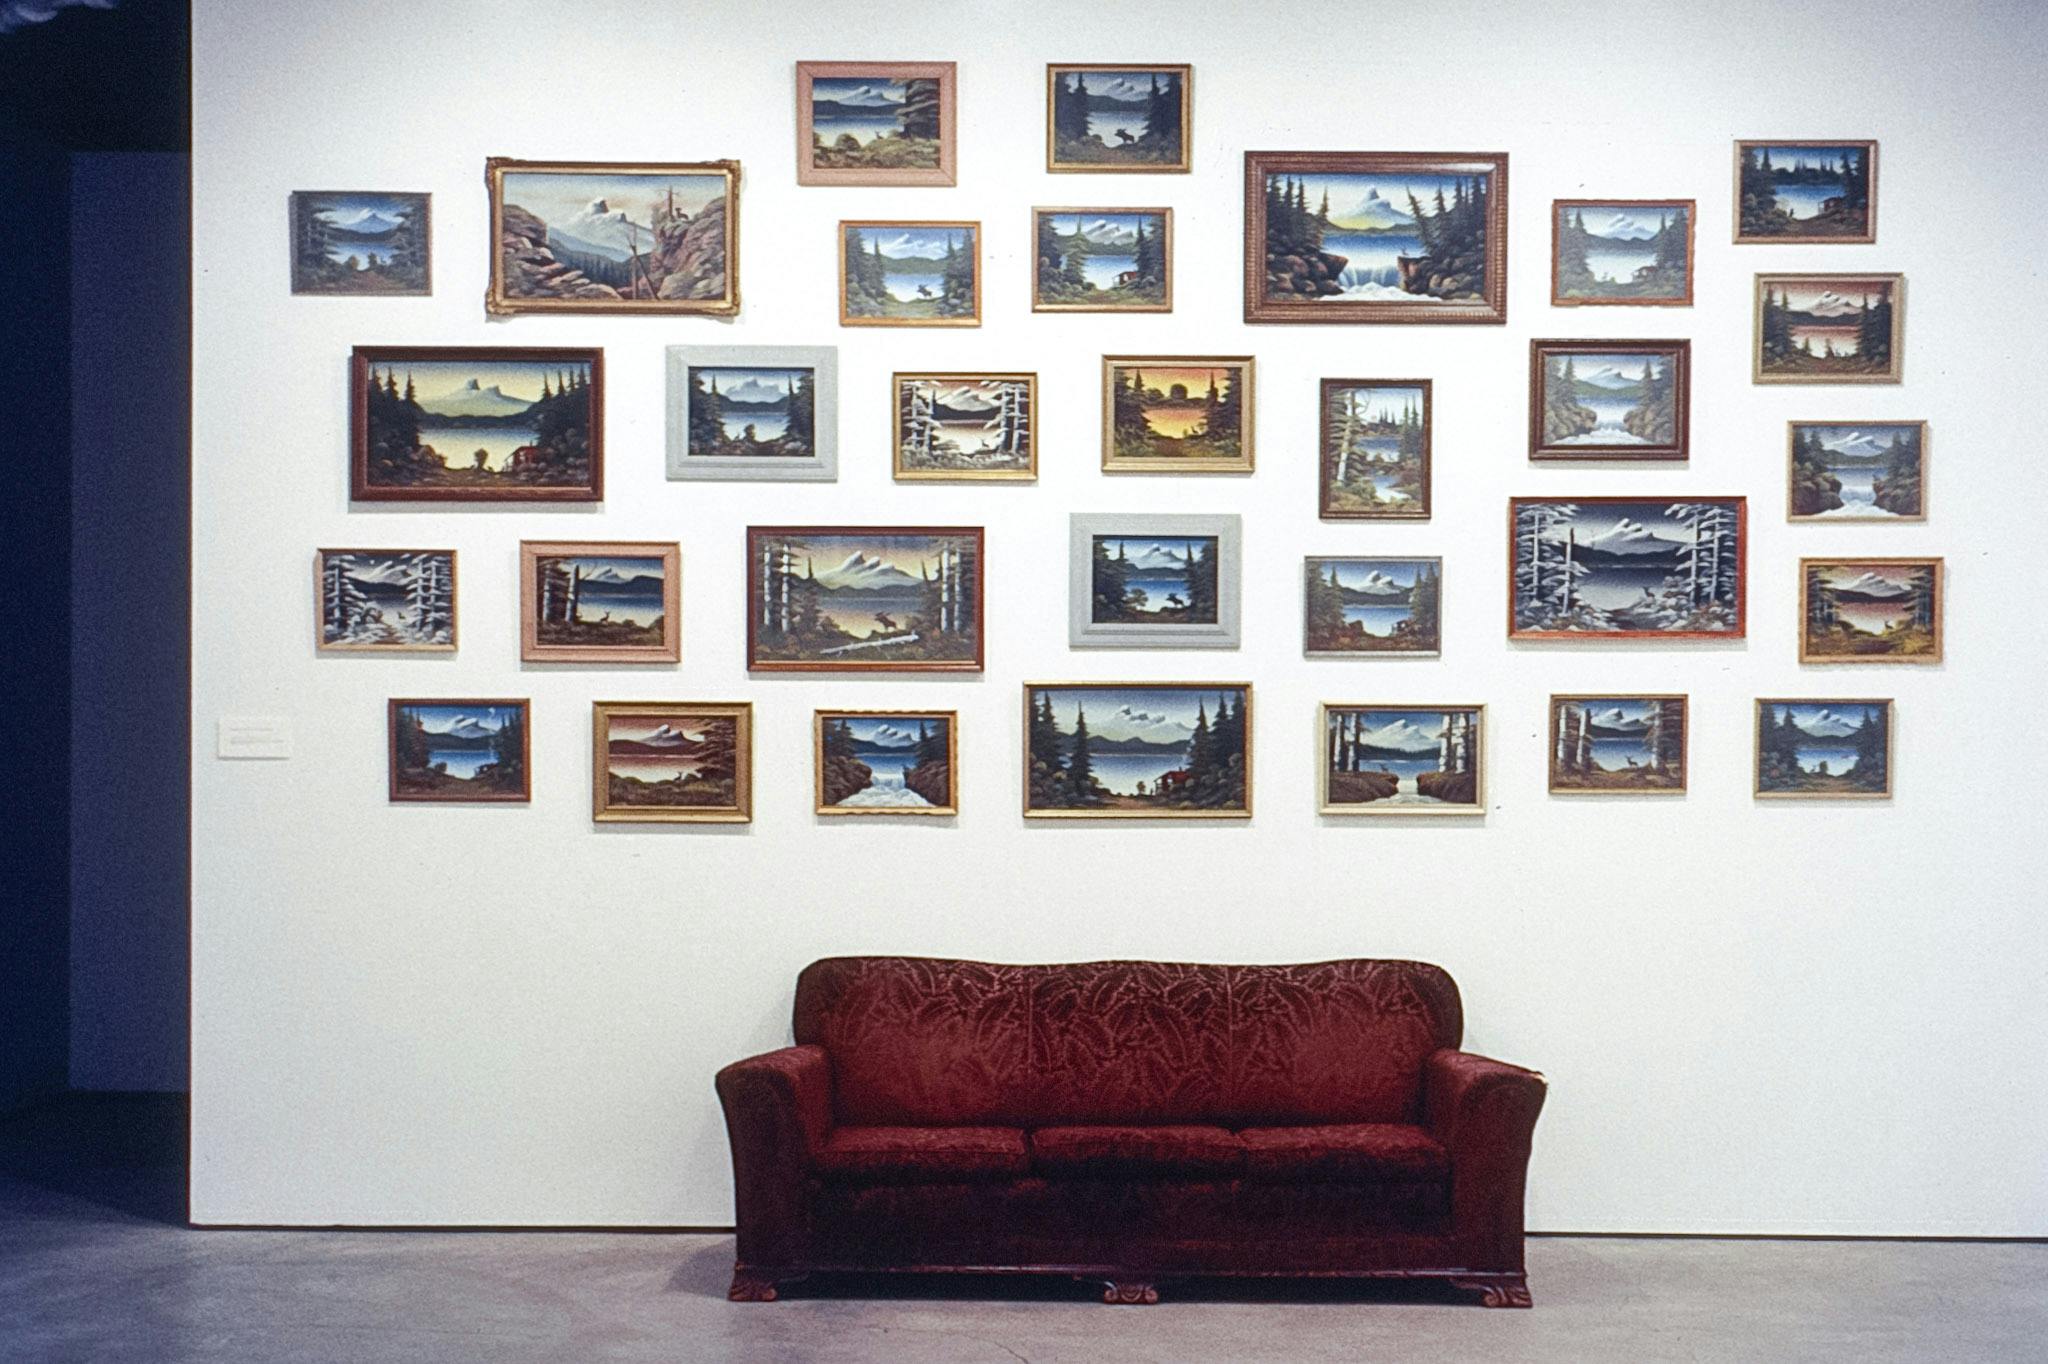 31 landscape paintings of many sizes in various frames mounted on a white wall in a gallery space. Below, in front of the wall, there is a faded red velvet couch with a feather-shaped paisley pattern.